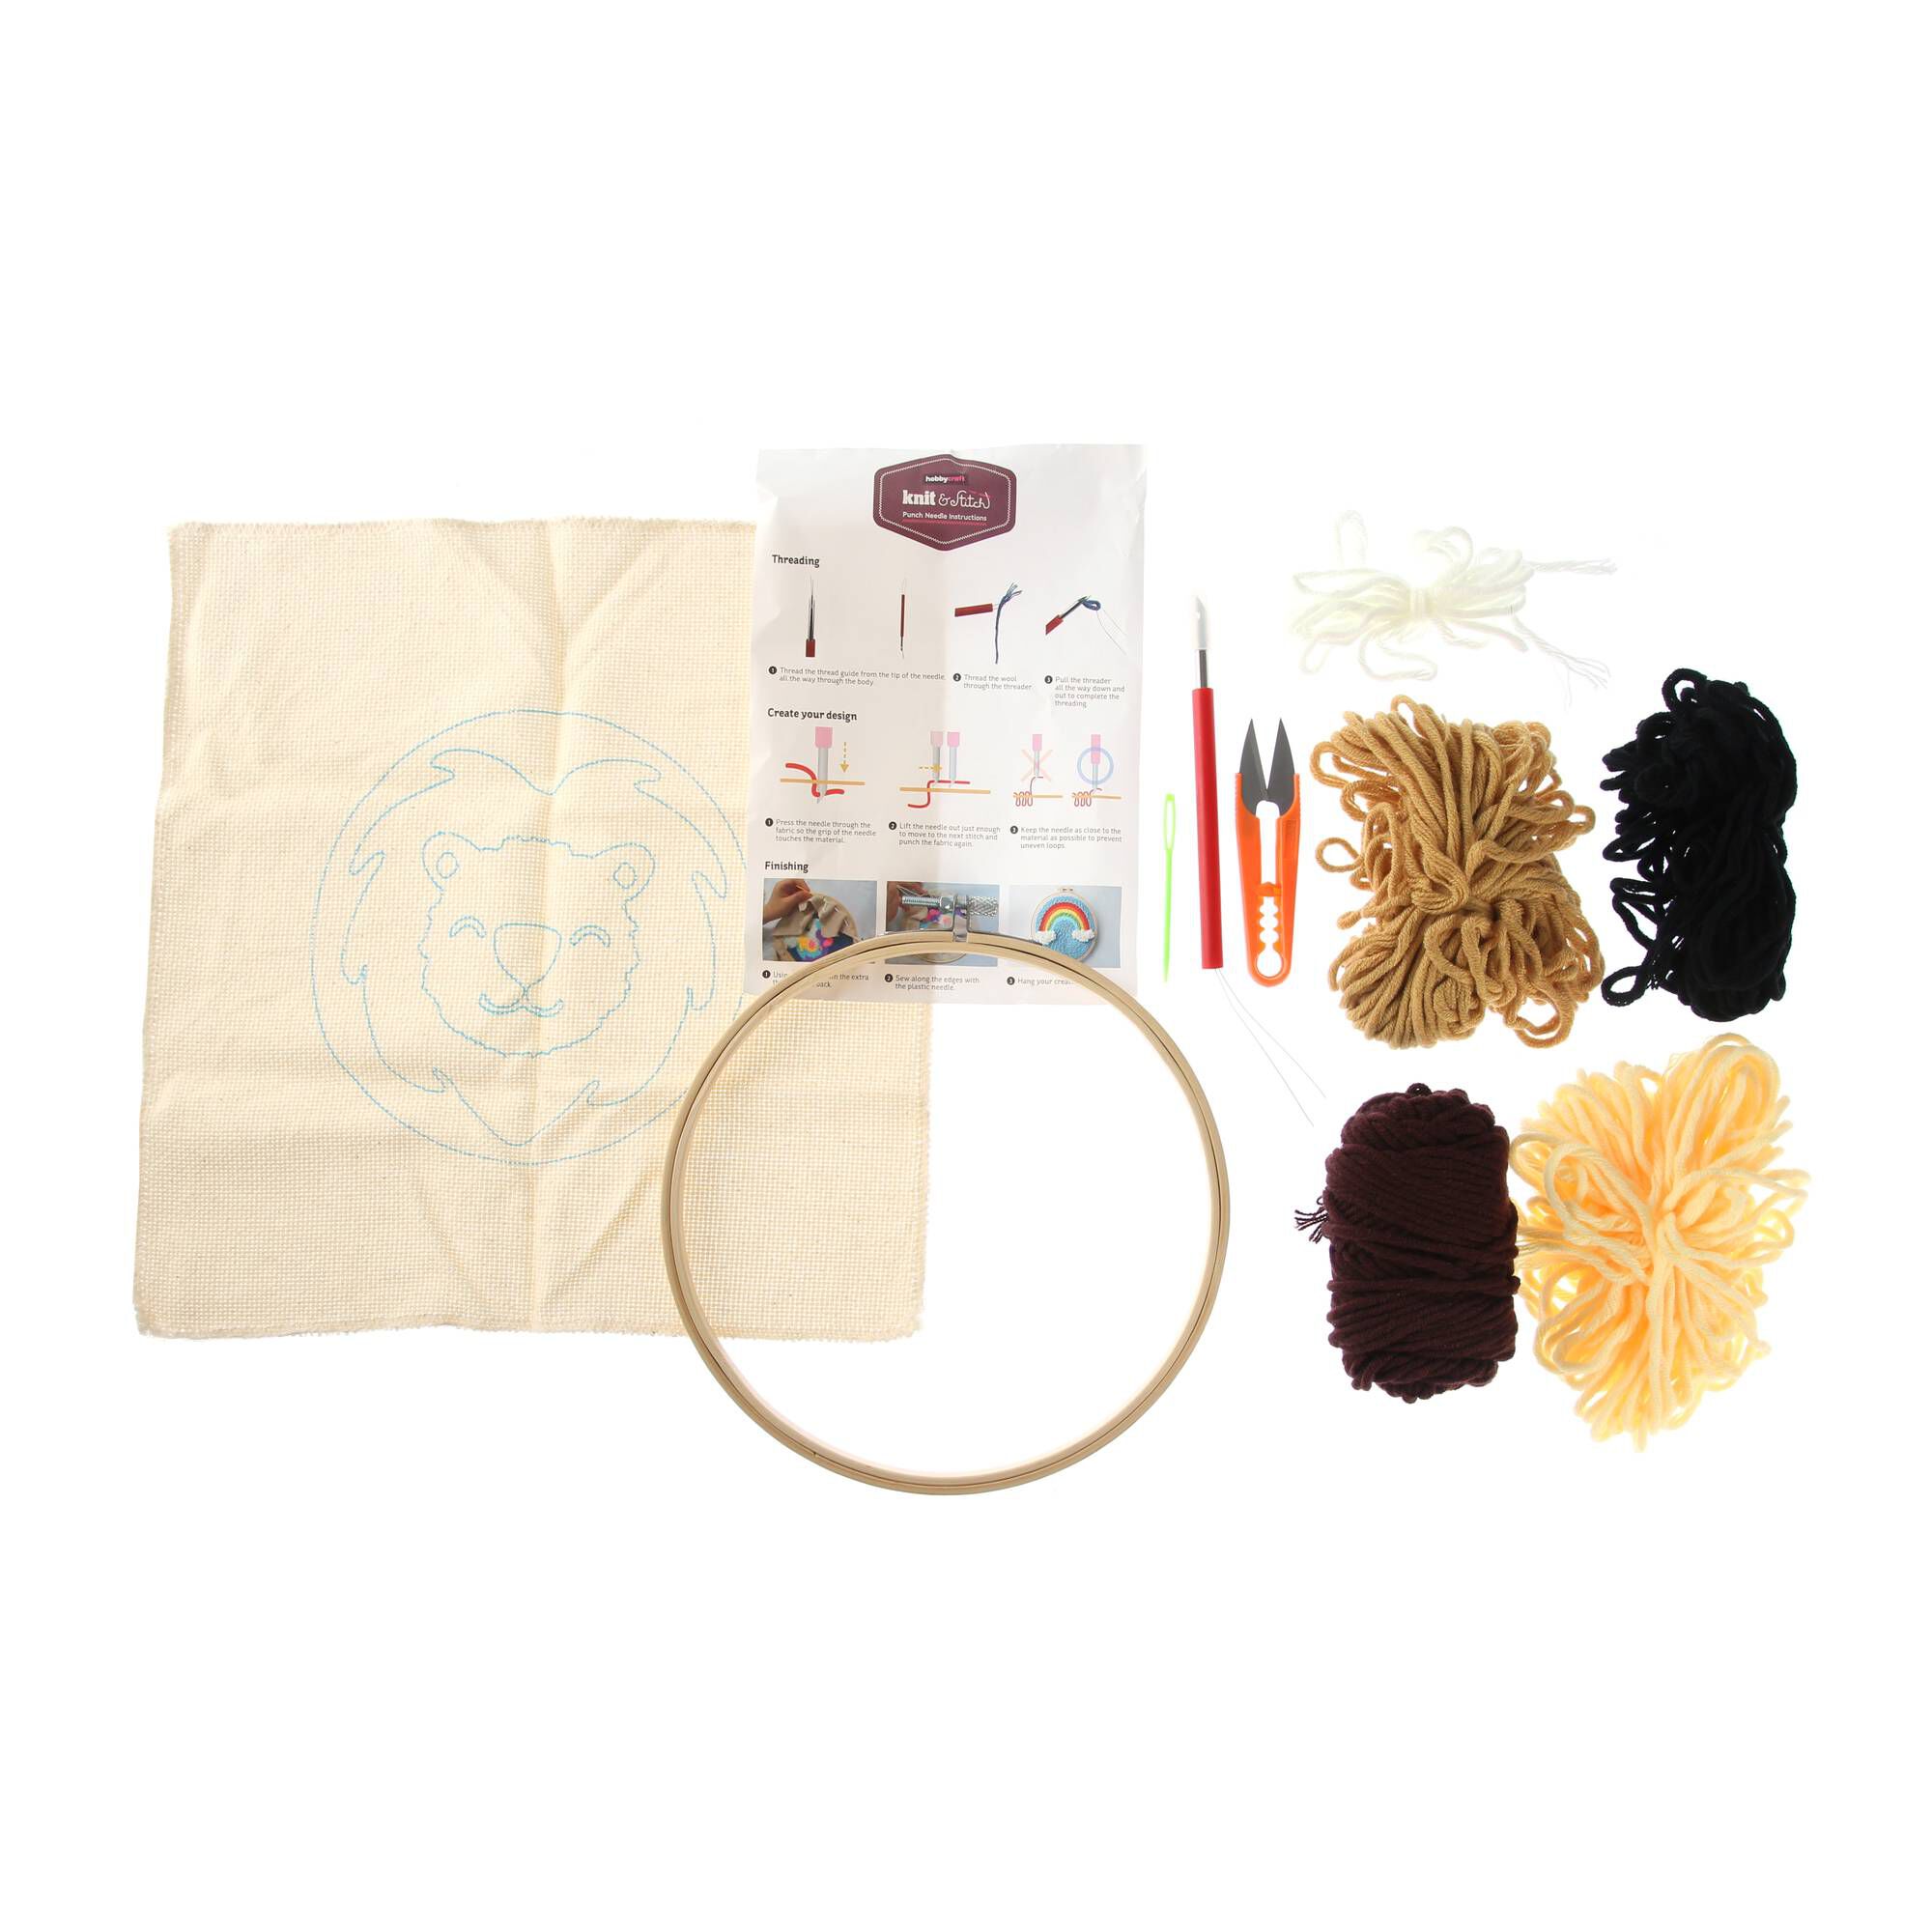 Lion Embroidery Punch Needle Hoop Kit 20cm | Hobbycraft